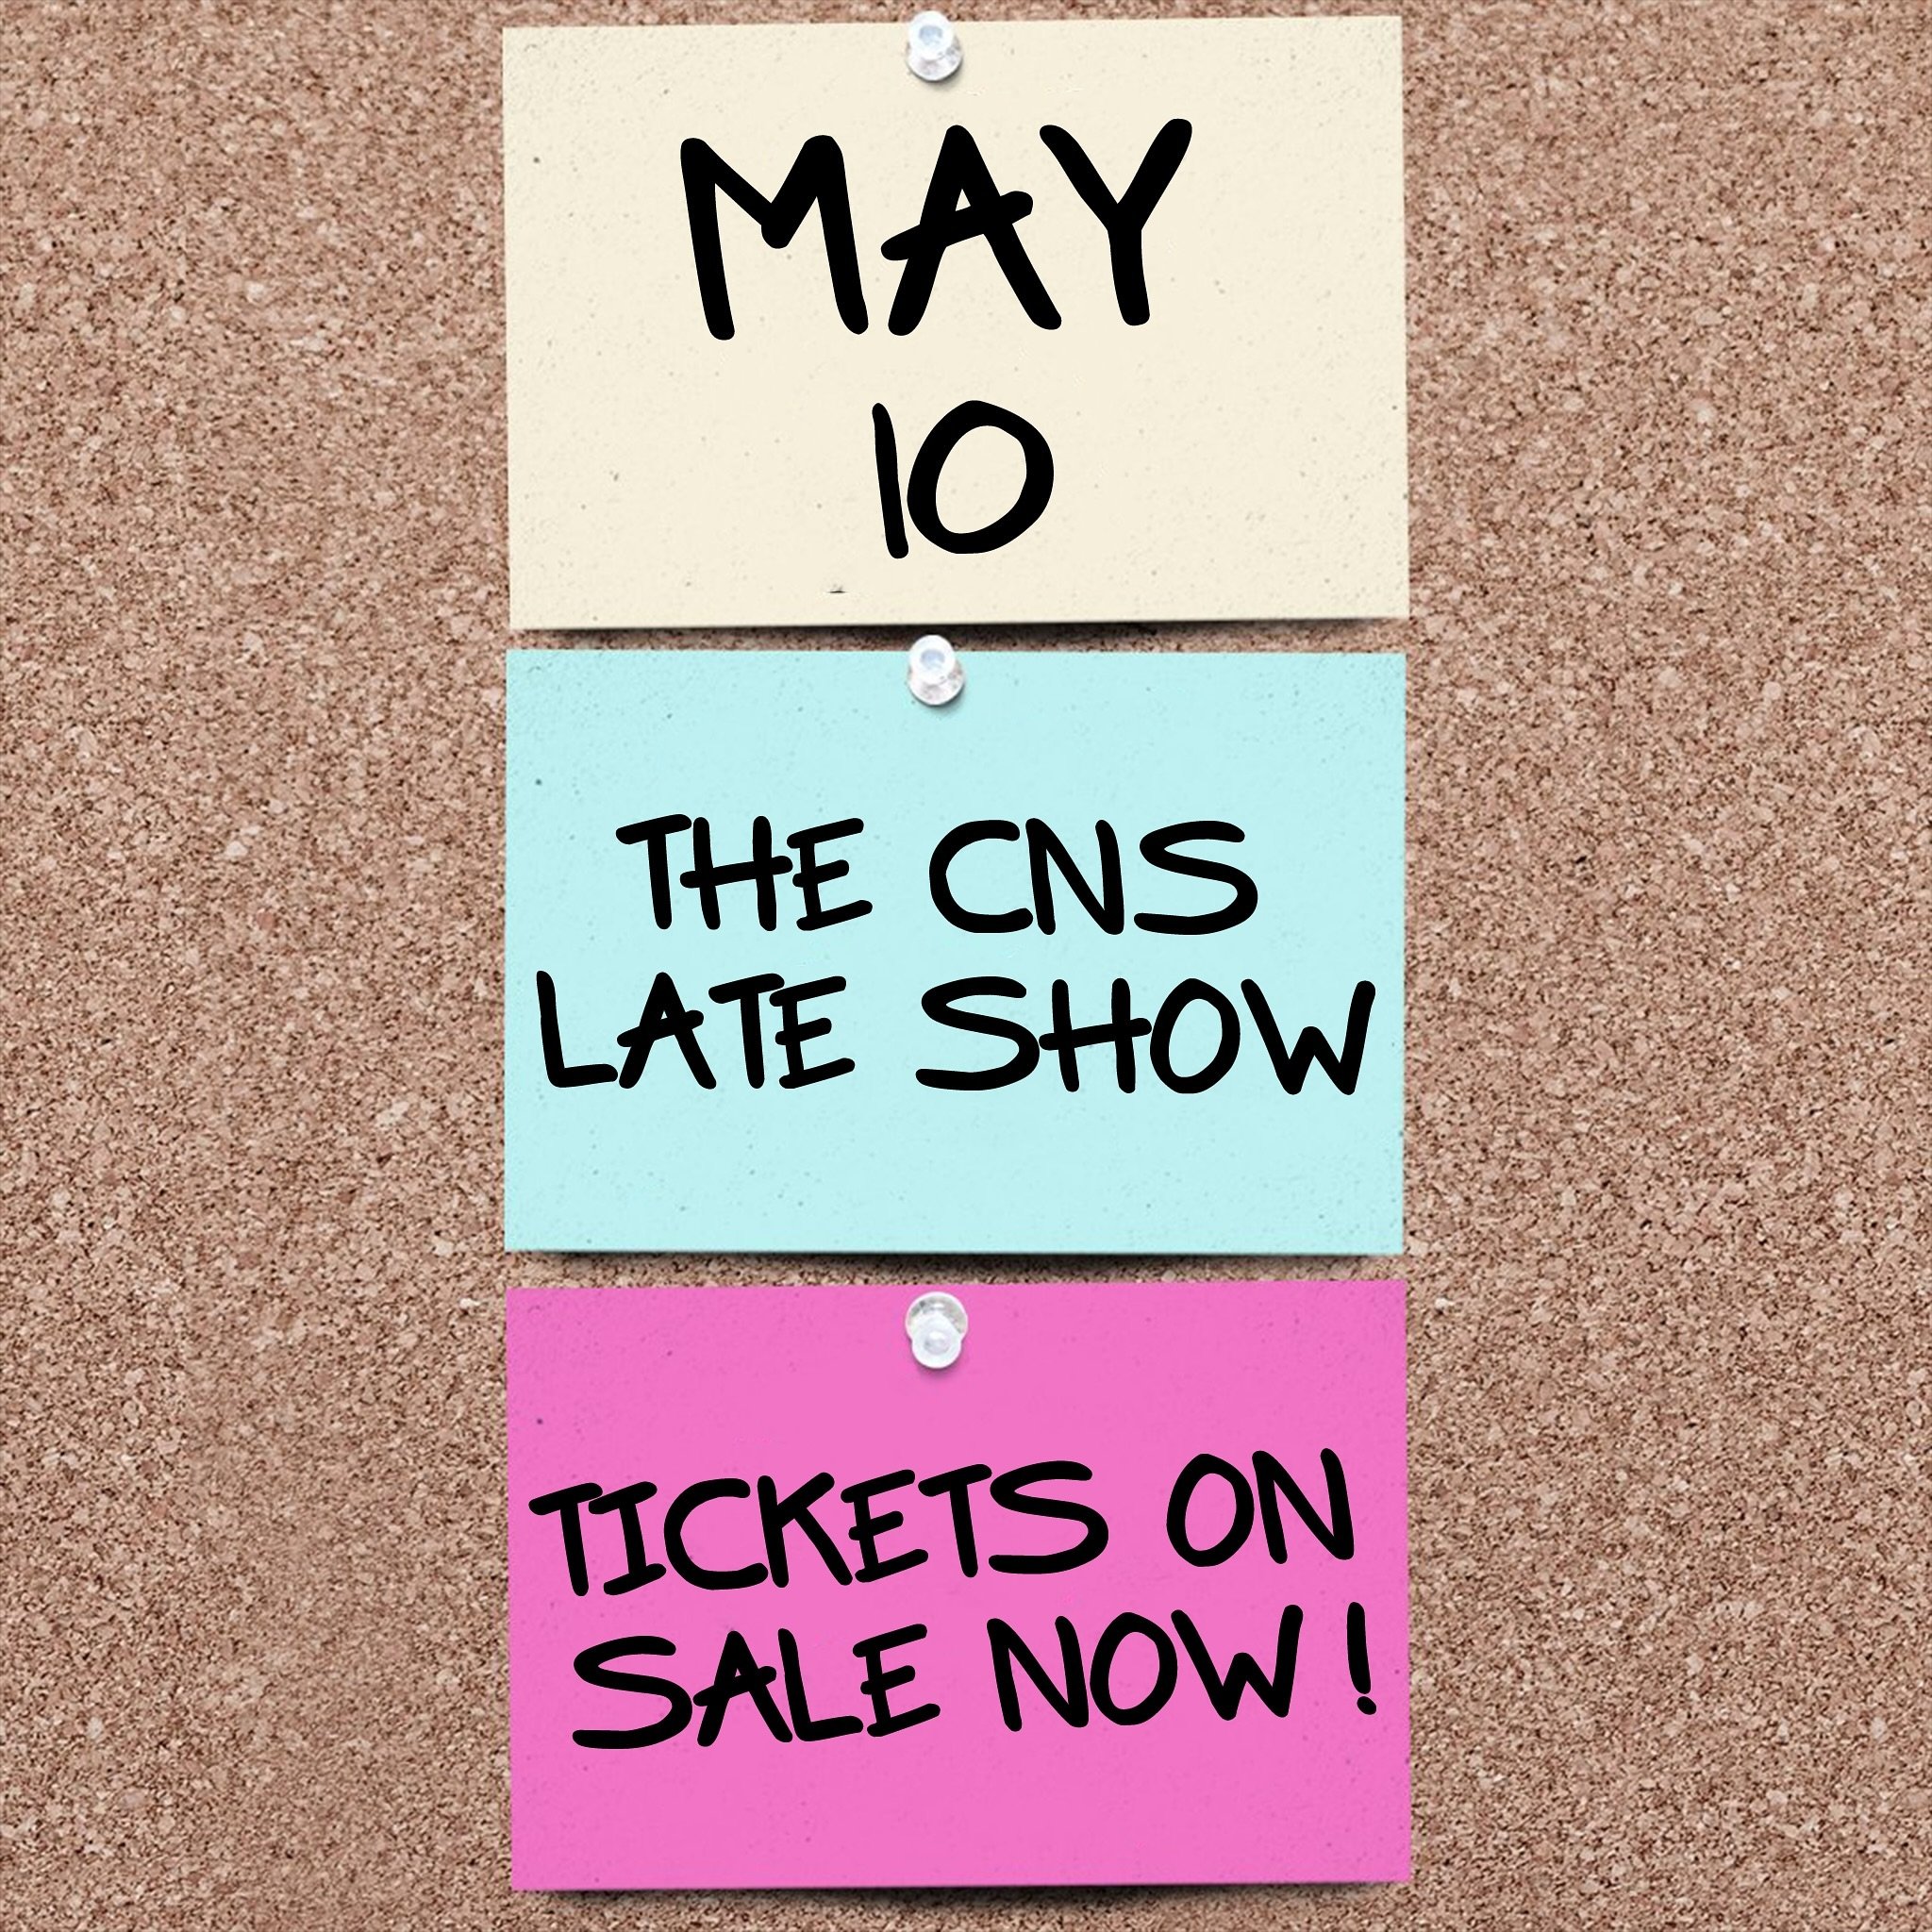 Live from North Syracuse, It&rsquo;s the CNS Late Show! Tickets are now on sale for the CNS High School Talent Show! Reserved seats are limited, and will go fast! Visit the link in our bio to purchase tickets now!

#4dproductions #techcrew #talentsho